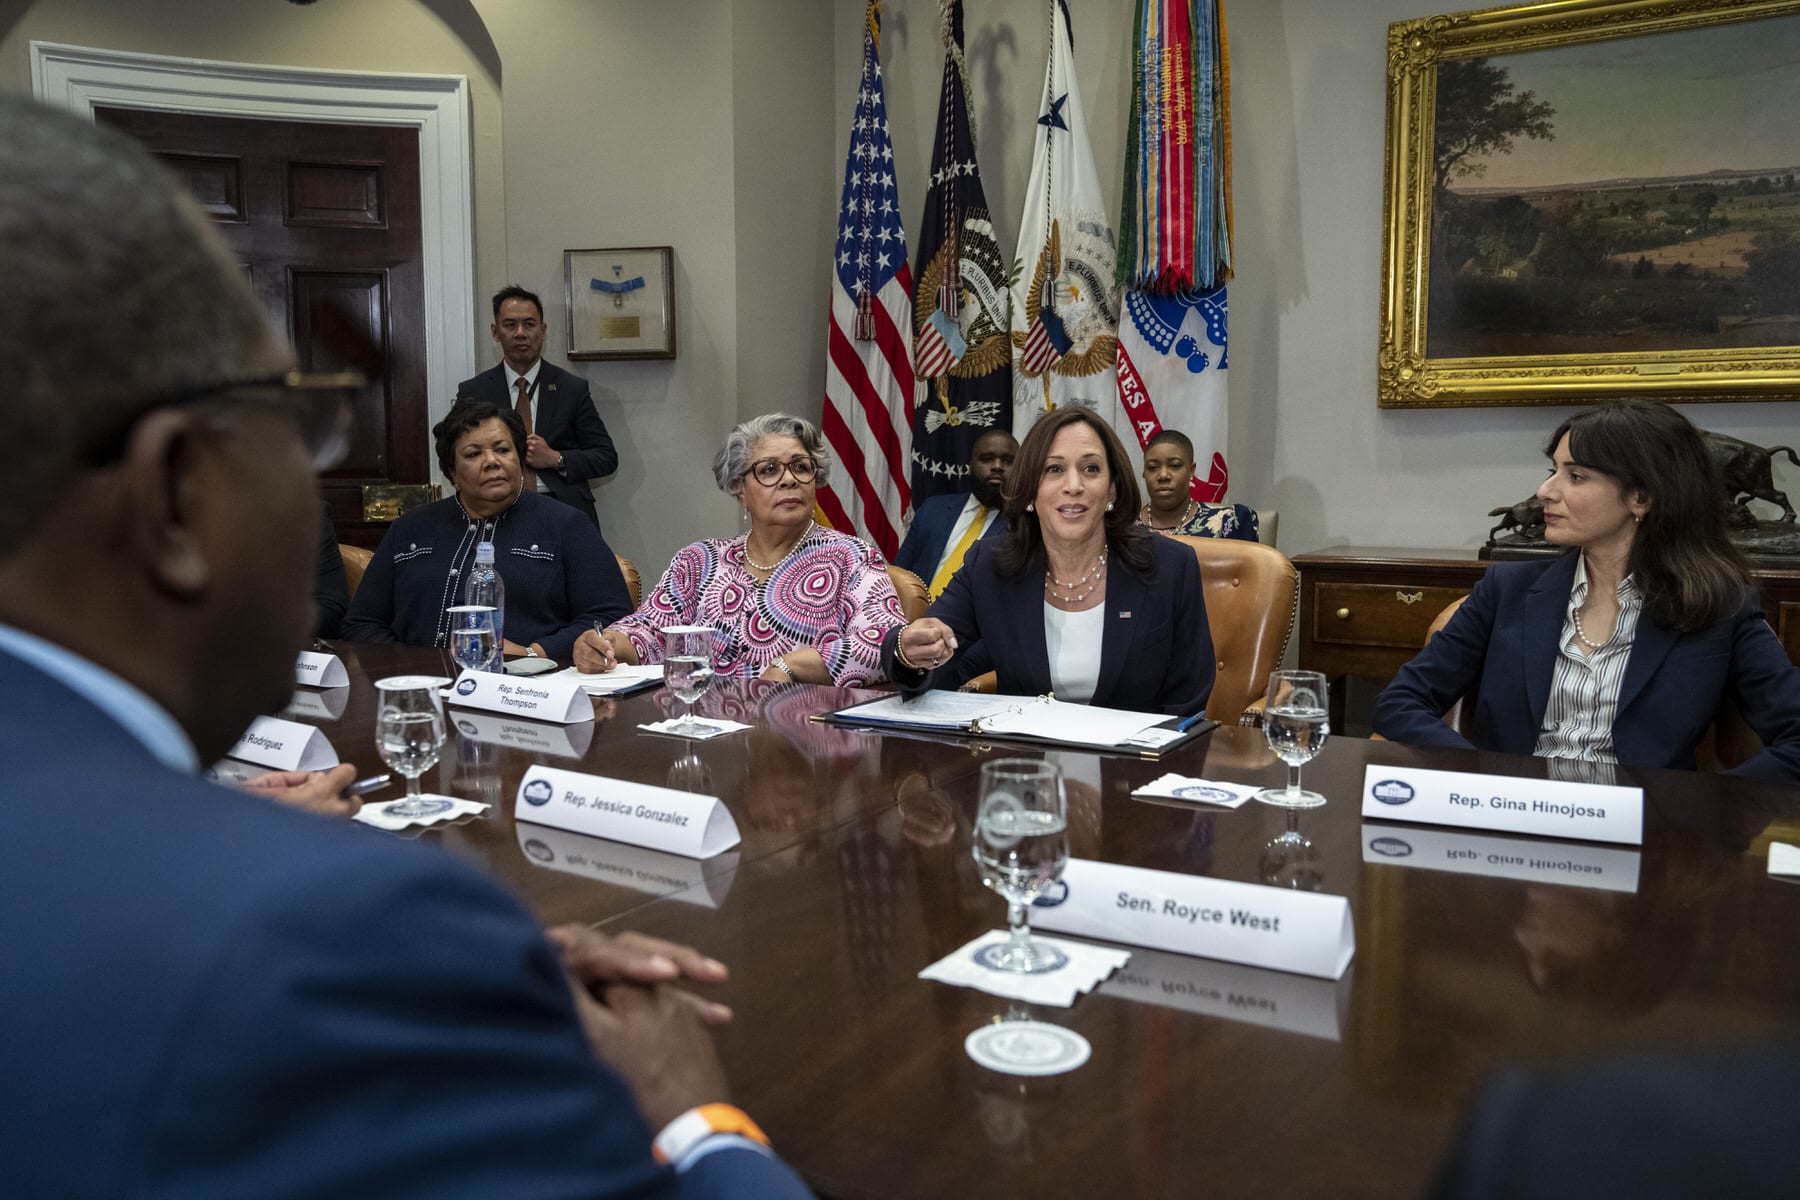 Vice President Kamala Harris speaks while meeting with Democratic members of the Texas Legislature in the Roosevelt Room of the White House.